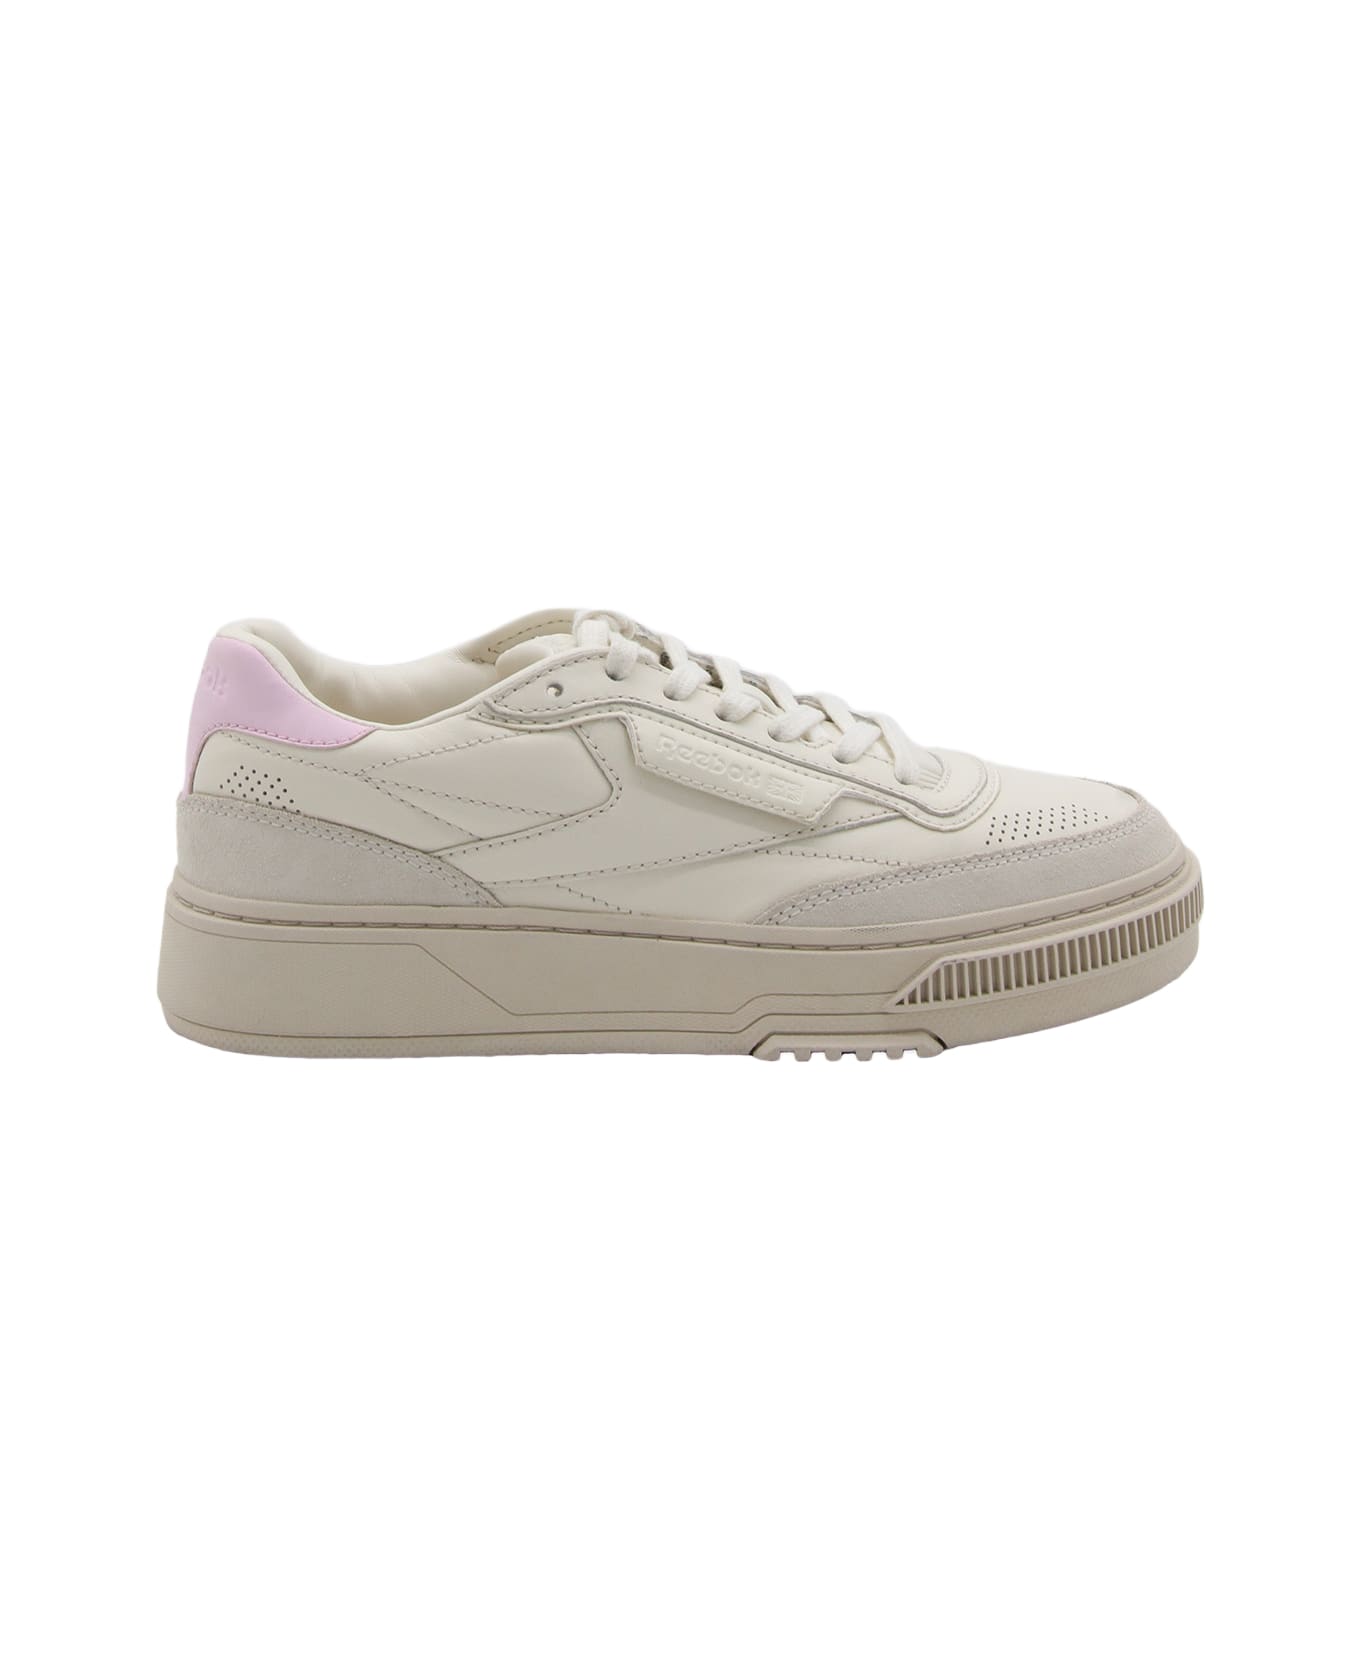 Reebok White And Pink Leather C Ltd Sneakers - Light pink スニーカー